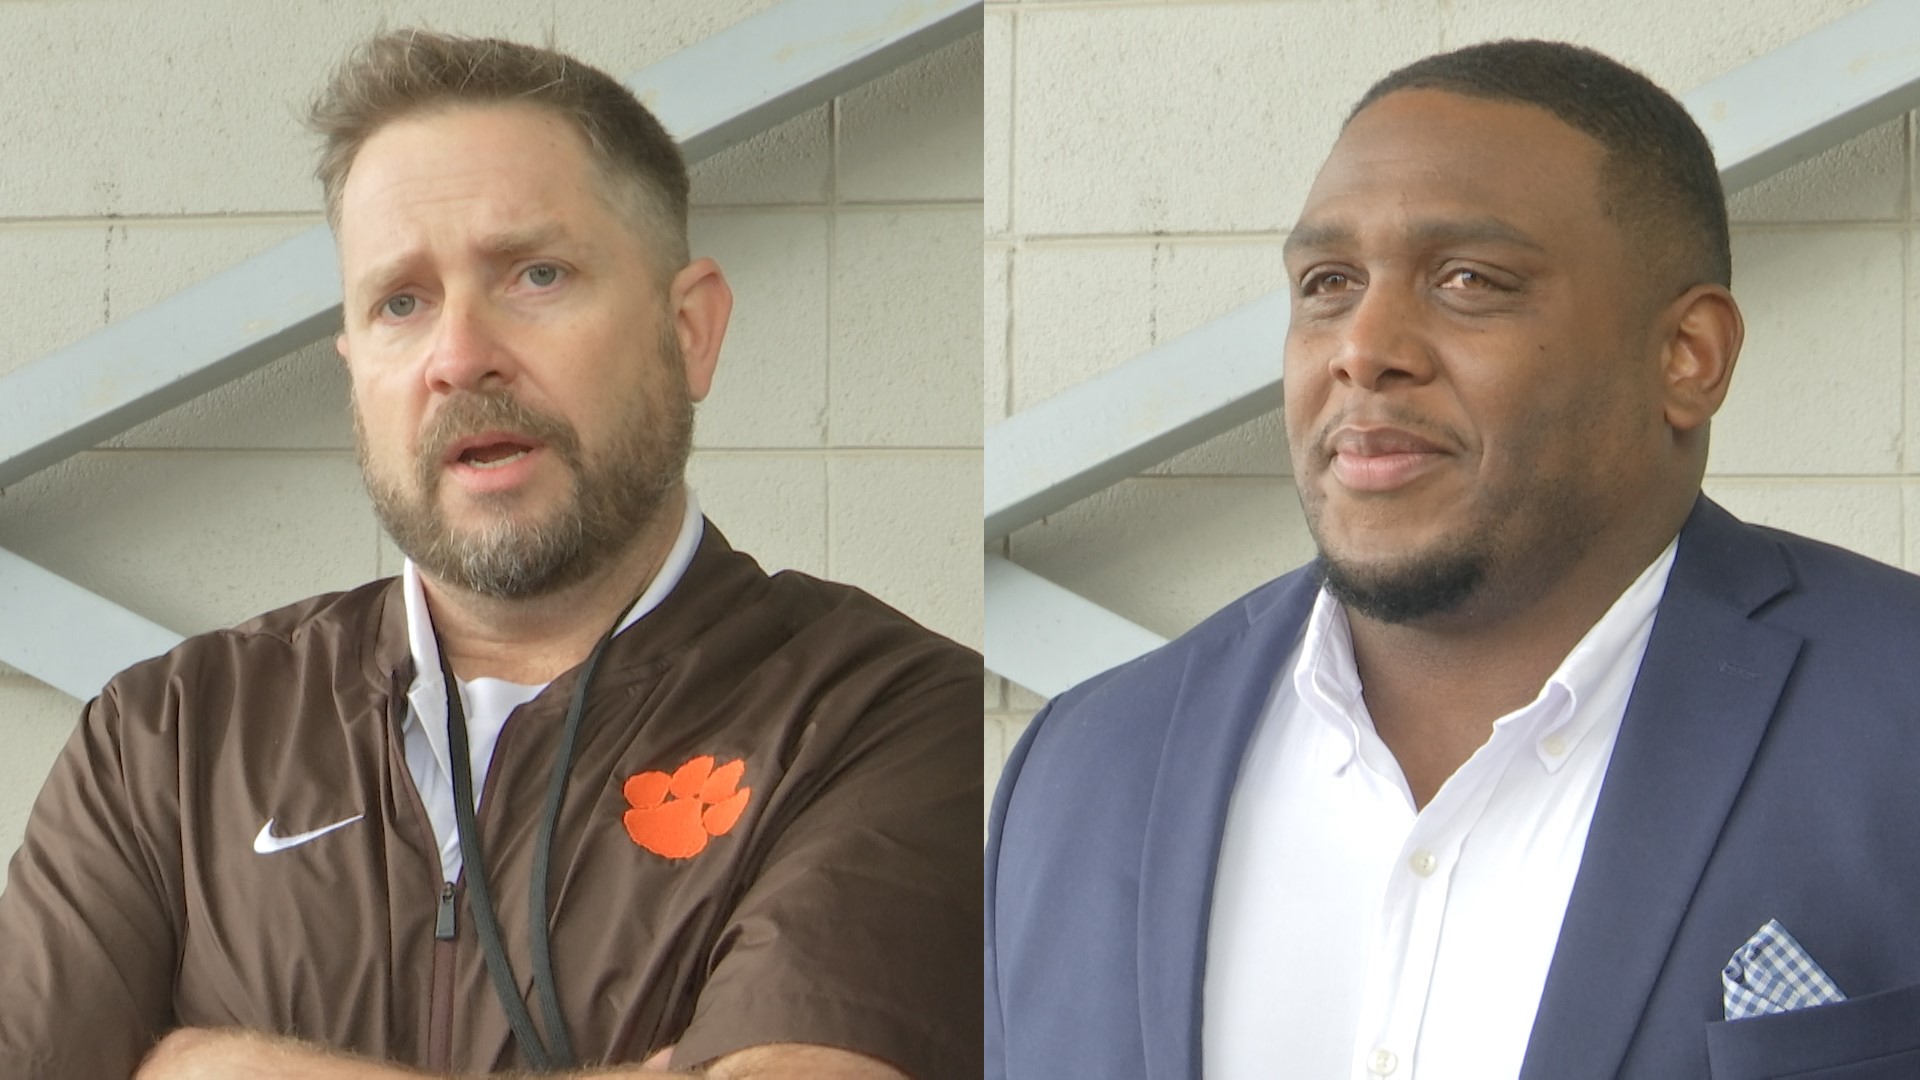 Irving McGuire will lead the Lee Generals this season, and Rich Dutton will lead the Grissom Tigers.